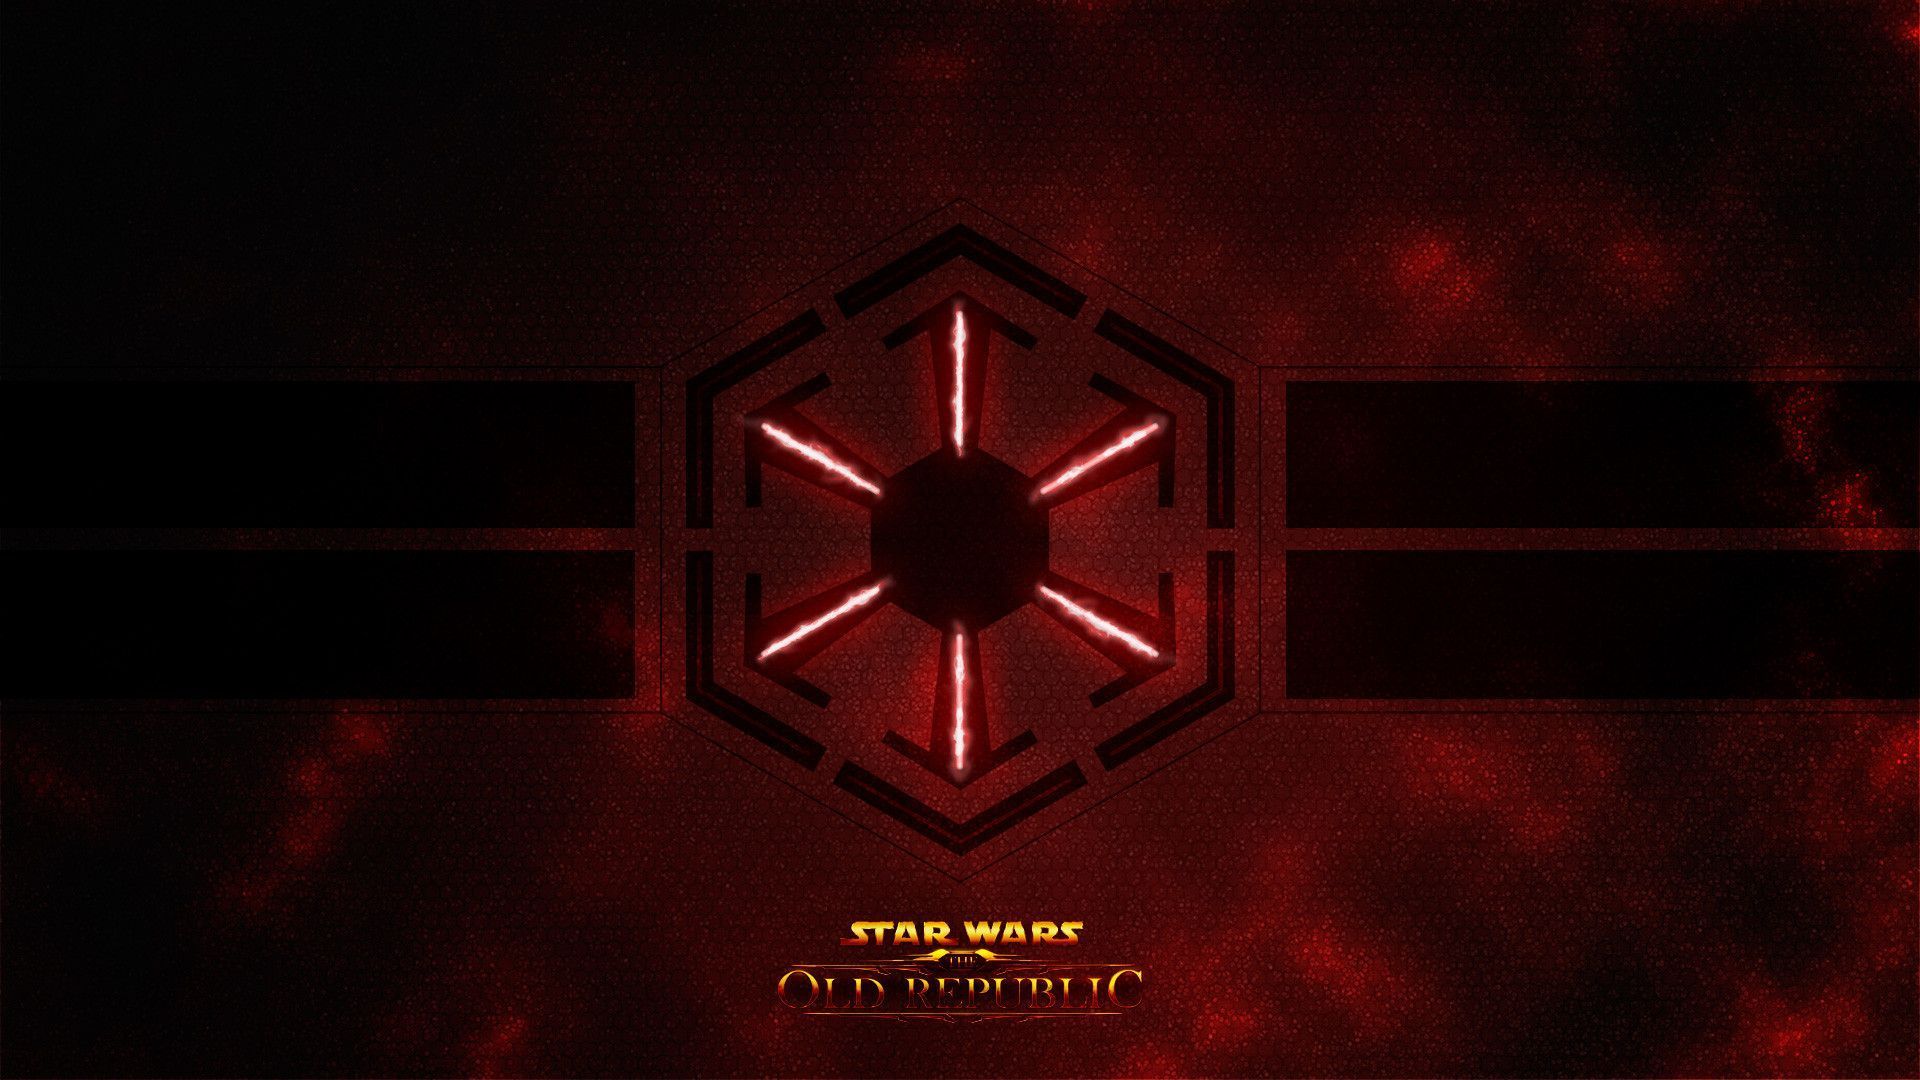 Sith Wallpapers